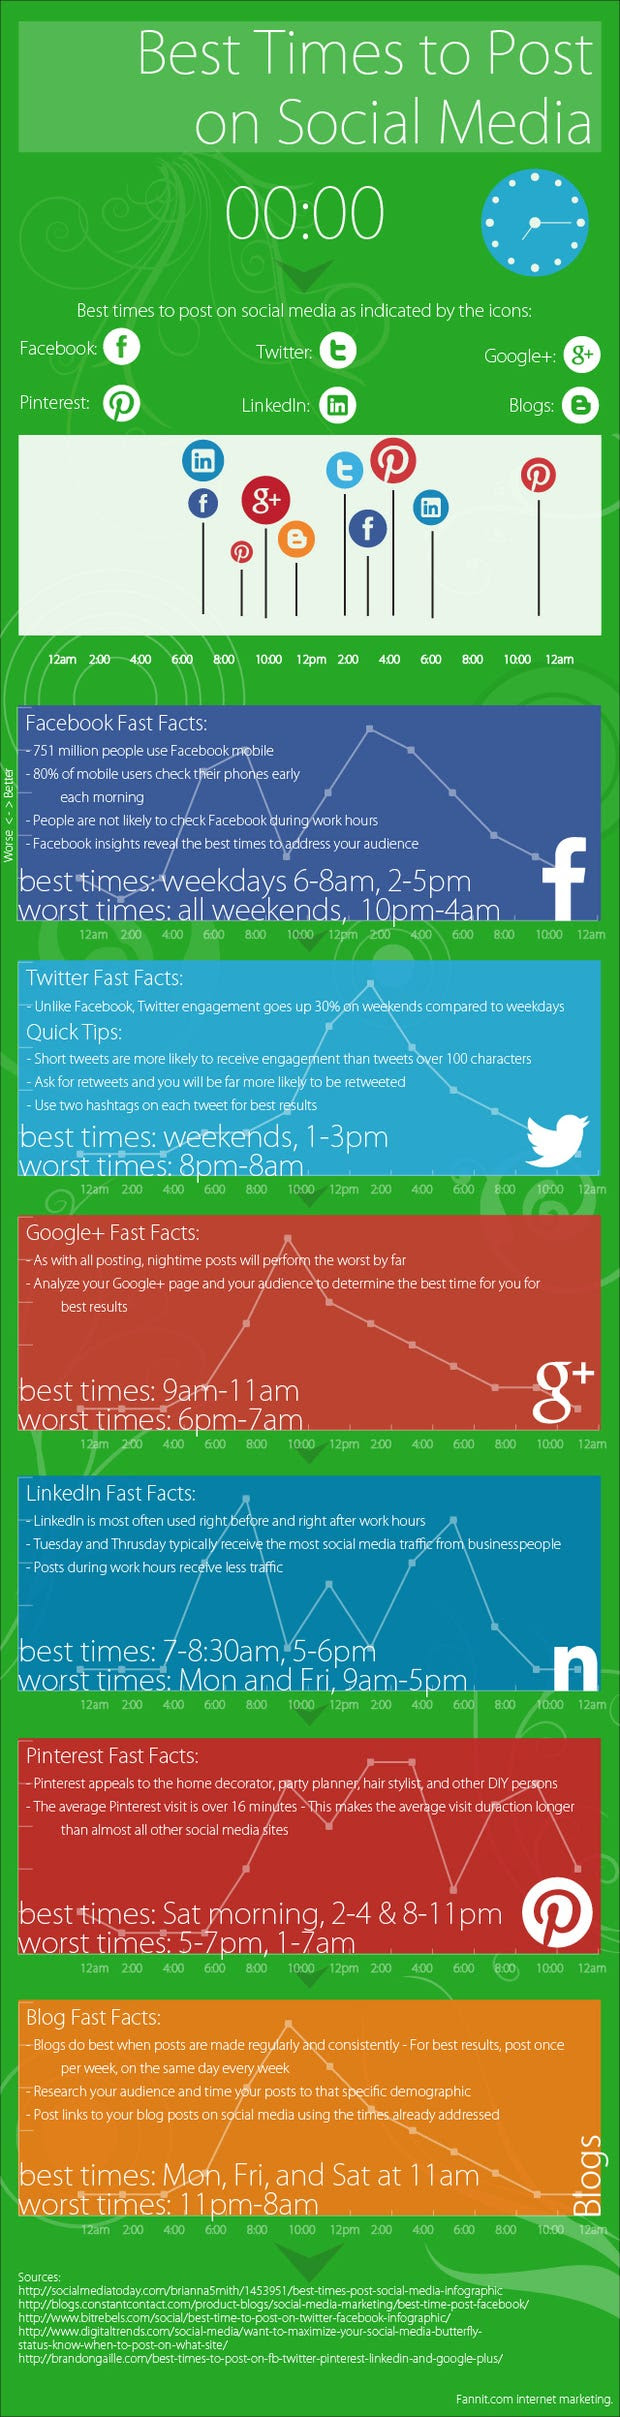 social media infographic when are the best times to post